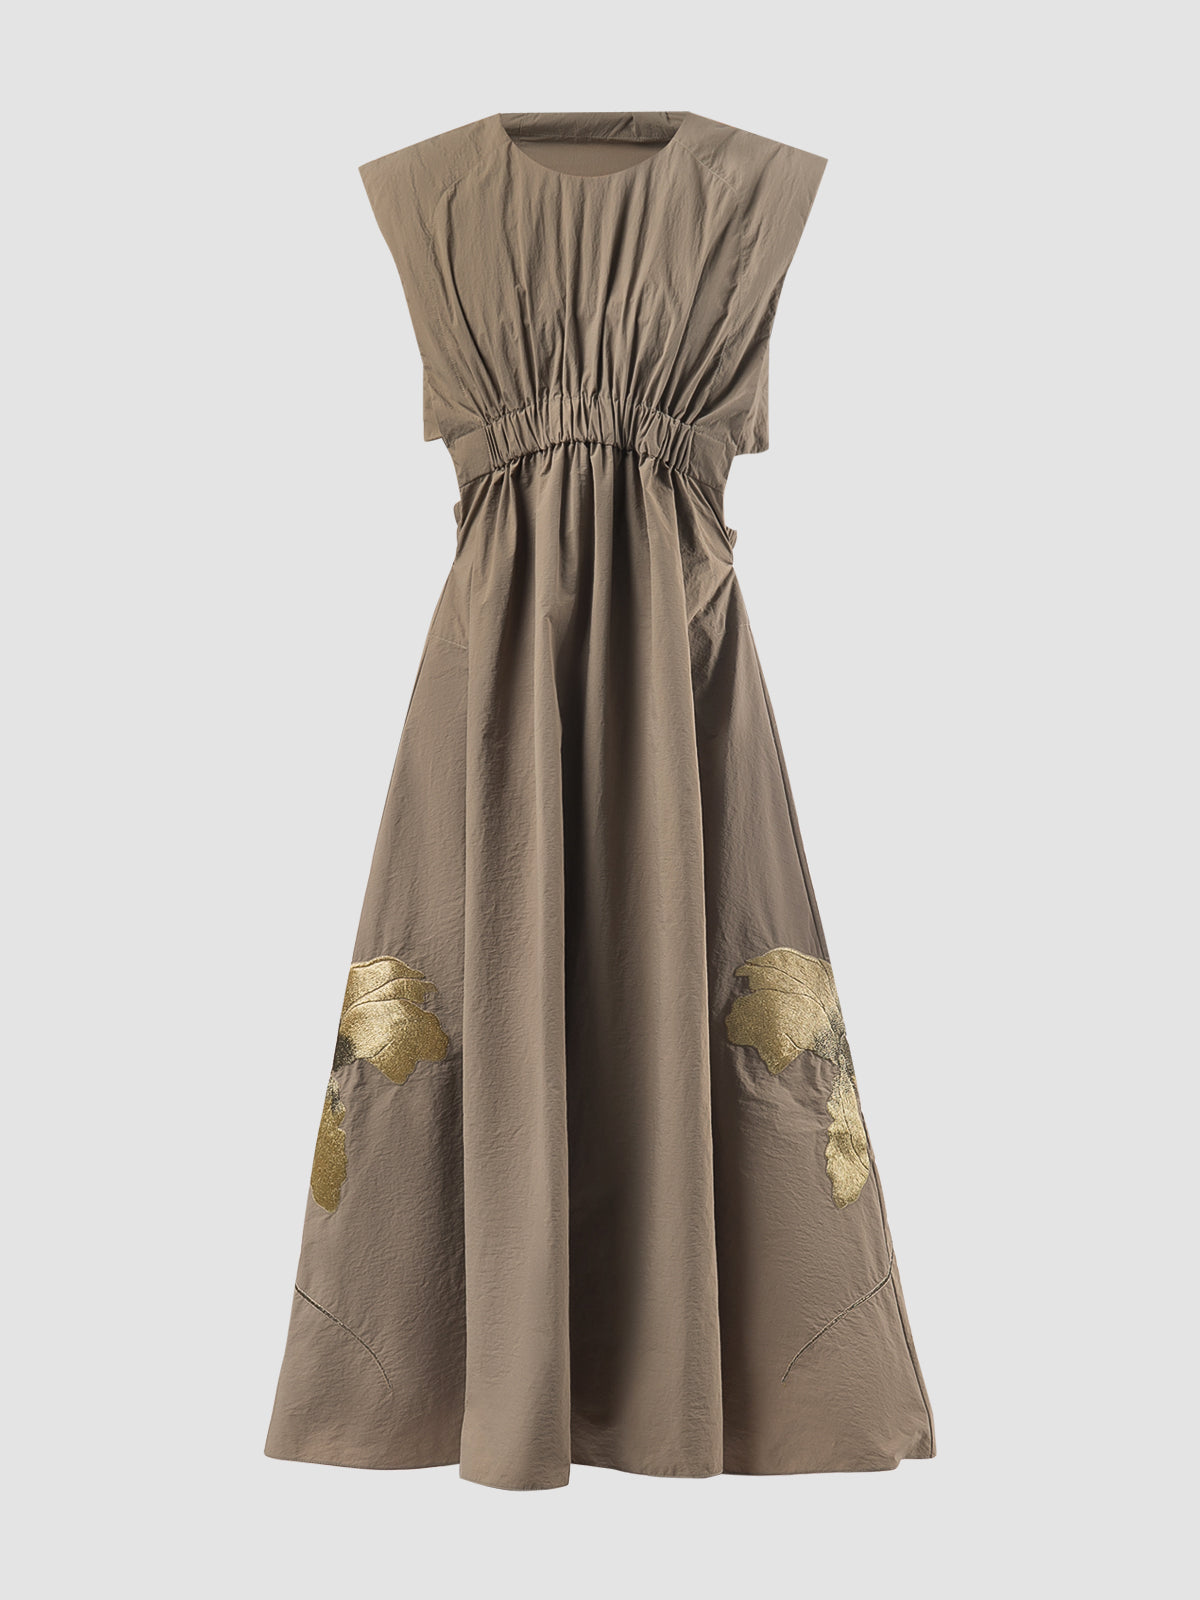 Pewter brown midi dress with gathered cutout details